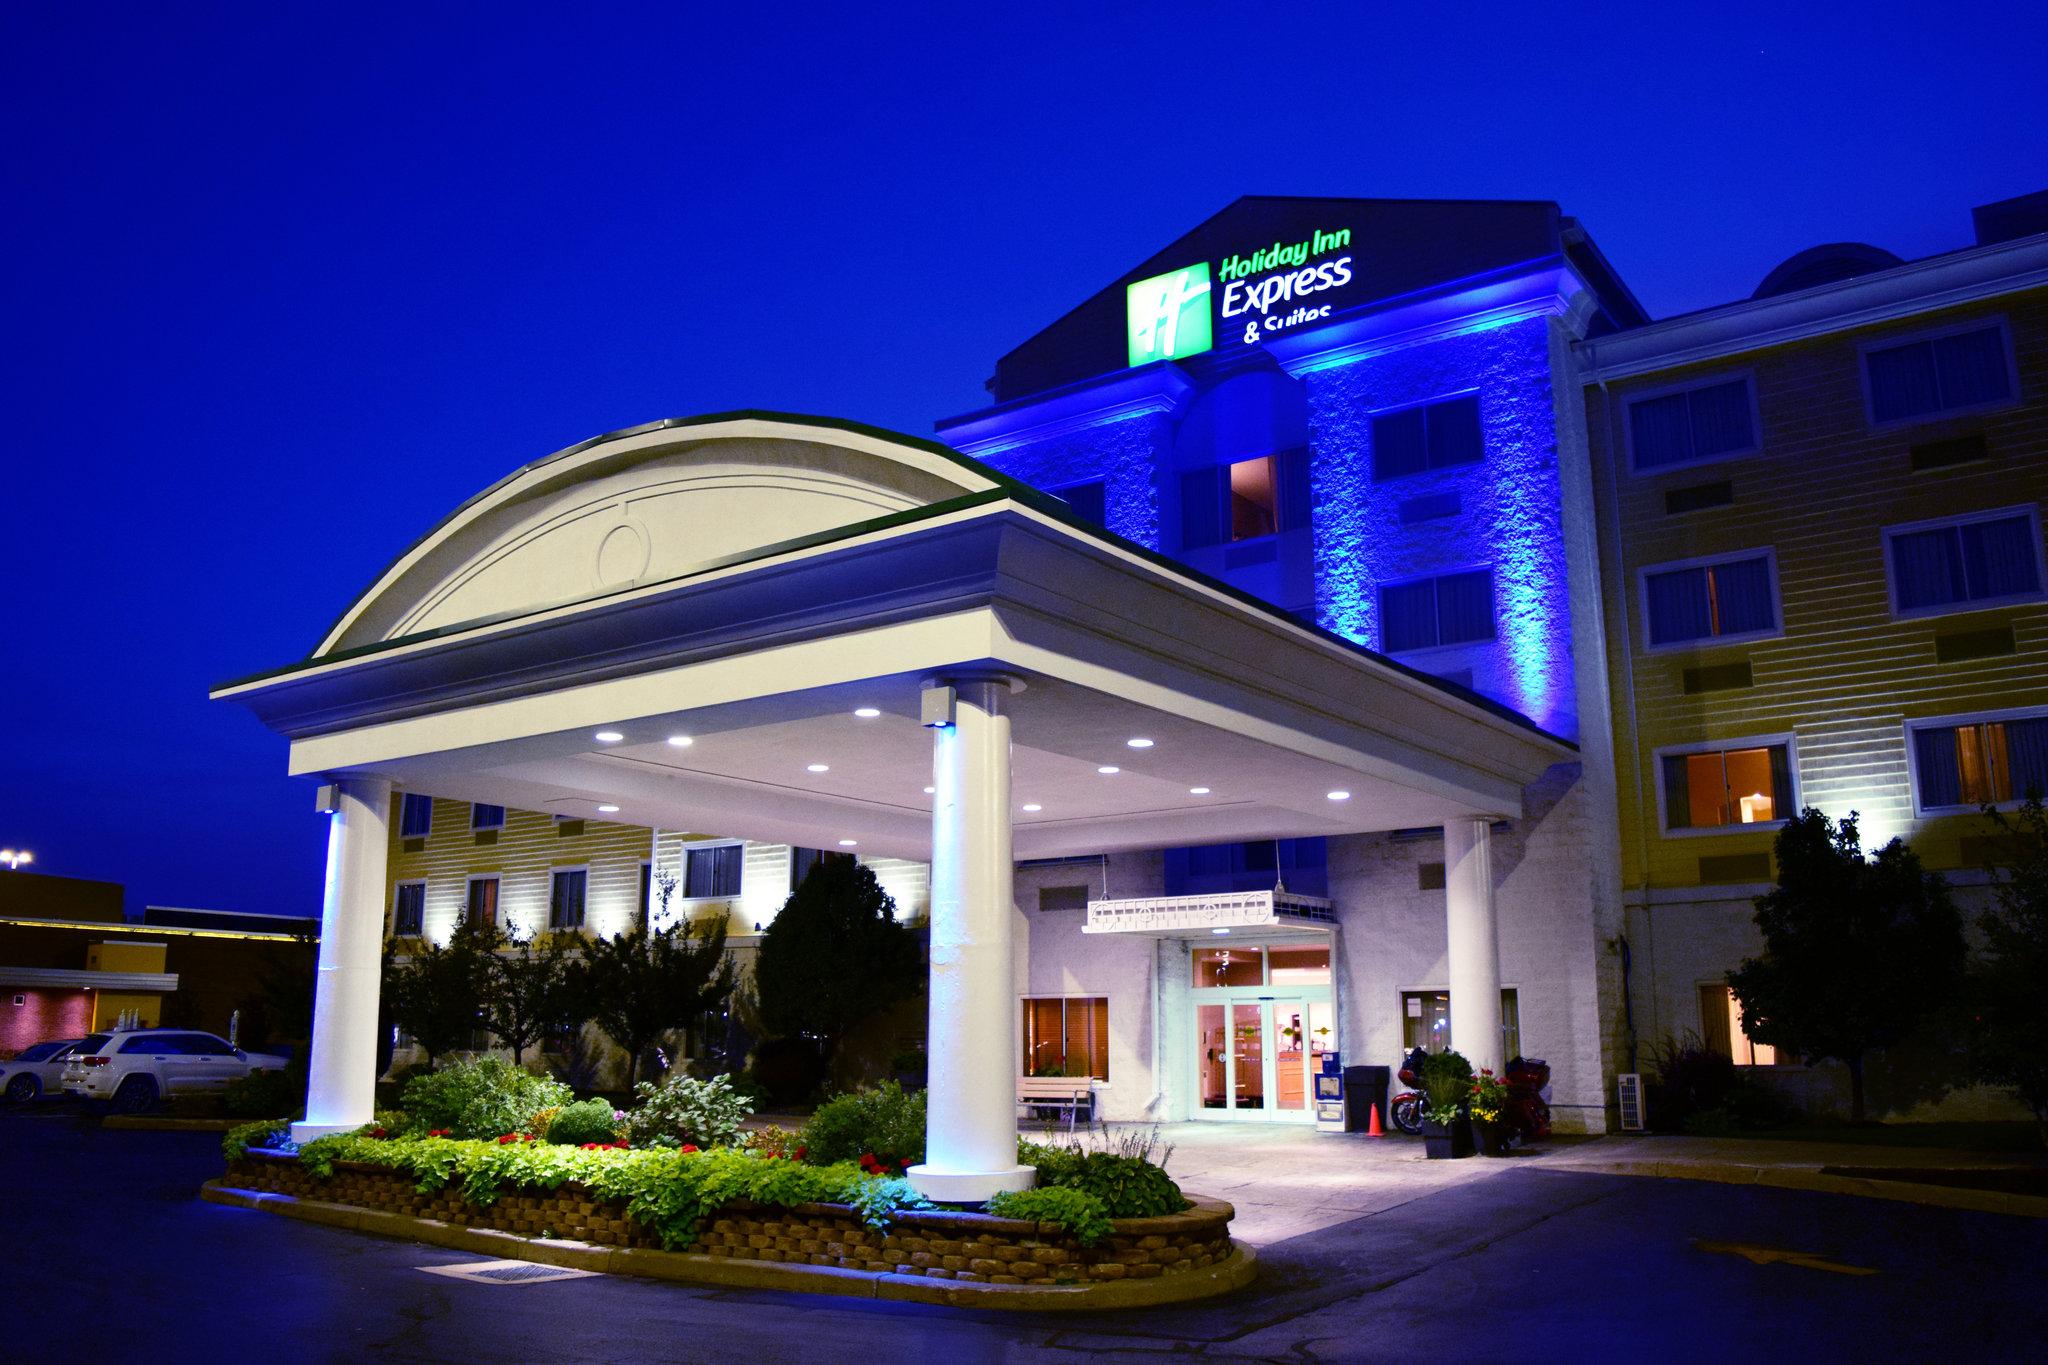 Holiday Inn Express Hotel & Suites Watertown-Thousand Islands in Watertown, NY